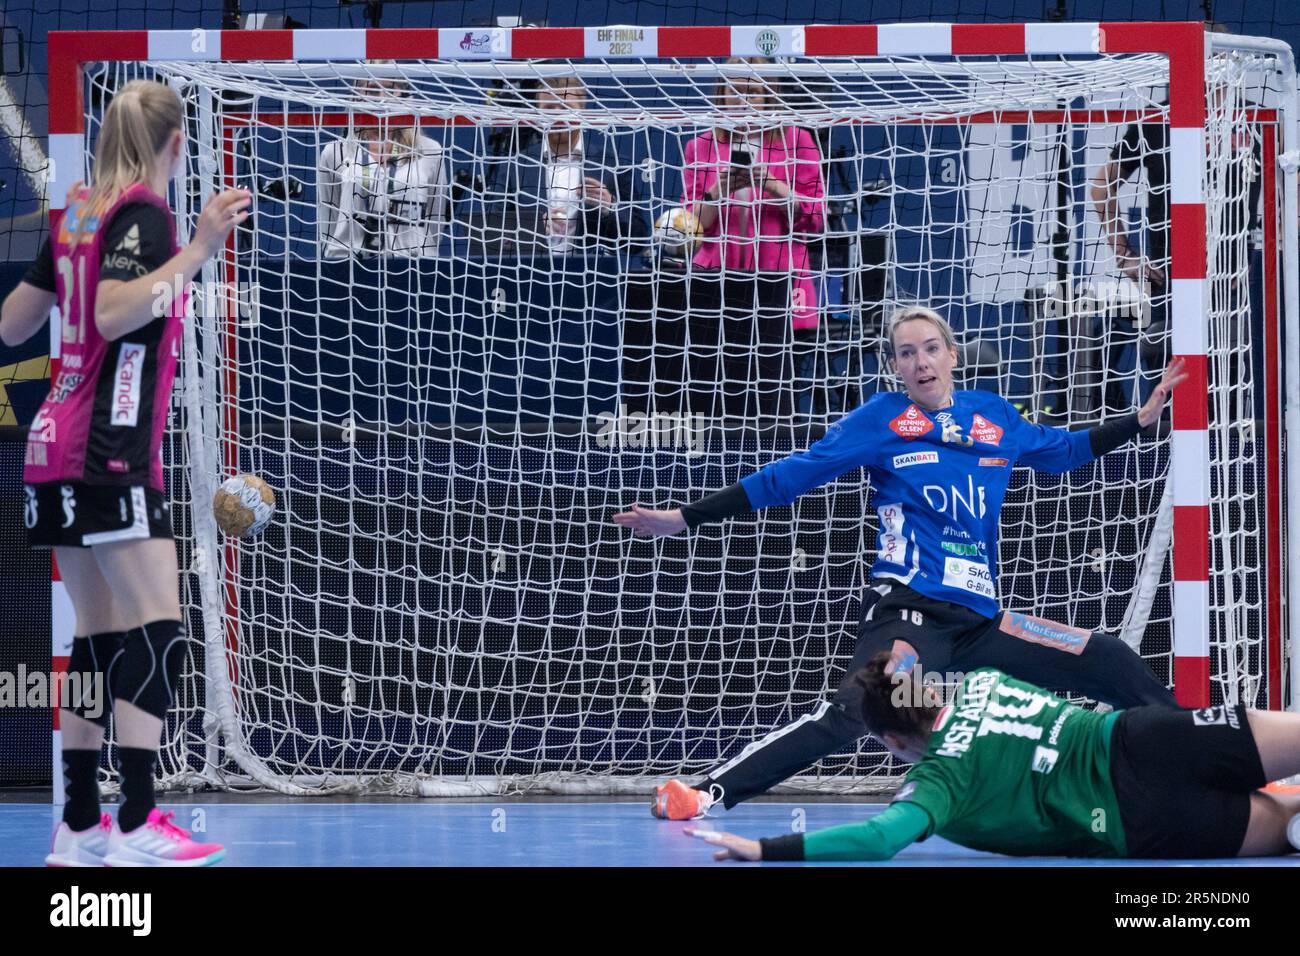 Budapest. 4th June, 2023. Katrine Lunde (top R) of Norway's Vipers Kristiansand fails to save a goal during the EHF Women's Champions League final match at the MVM Dome in Budapest, Hungary on June 4, 2023. Norway's Vipers Kristiansand beats Hungary's FTC-Rail Cargo Hungaria with 28-24 in the final match. Credit: Attila Volgyi/Xinhua/Alamy Live News Stock Photo